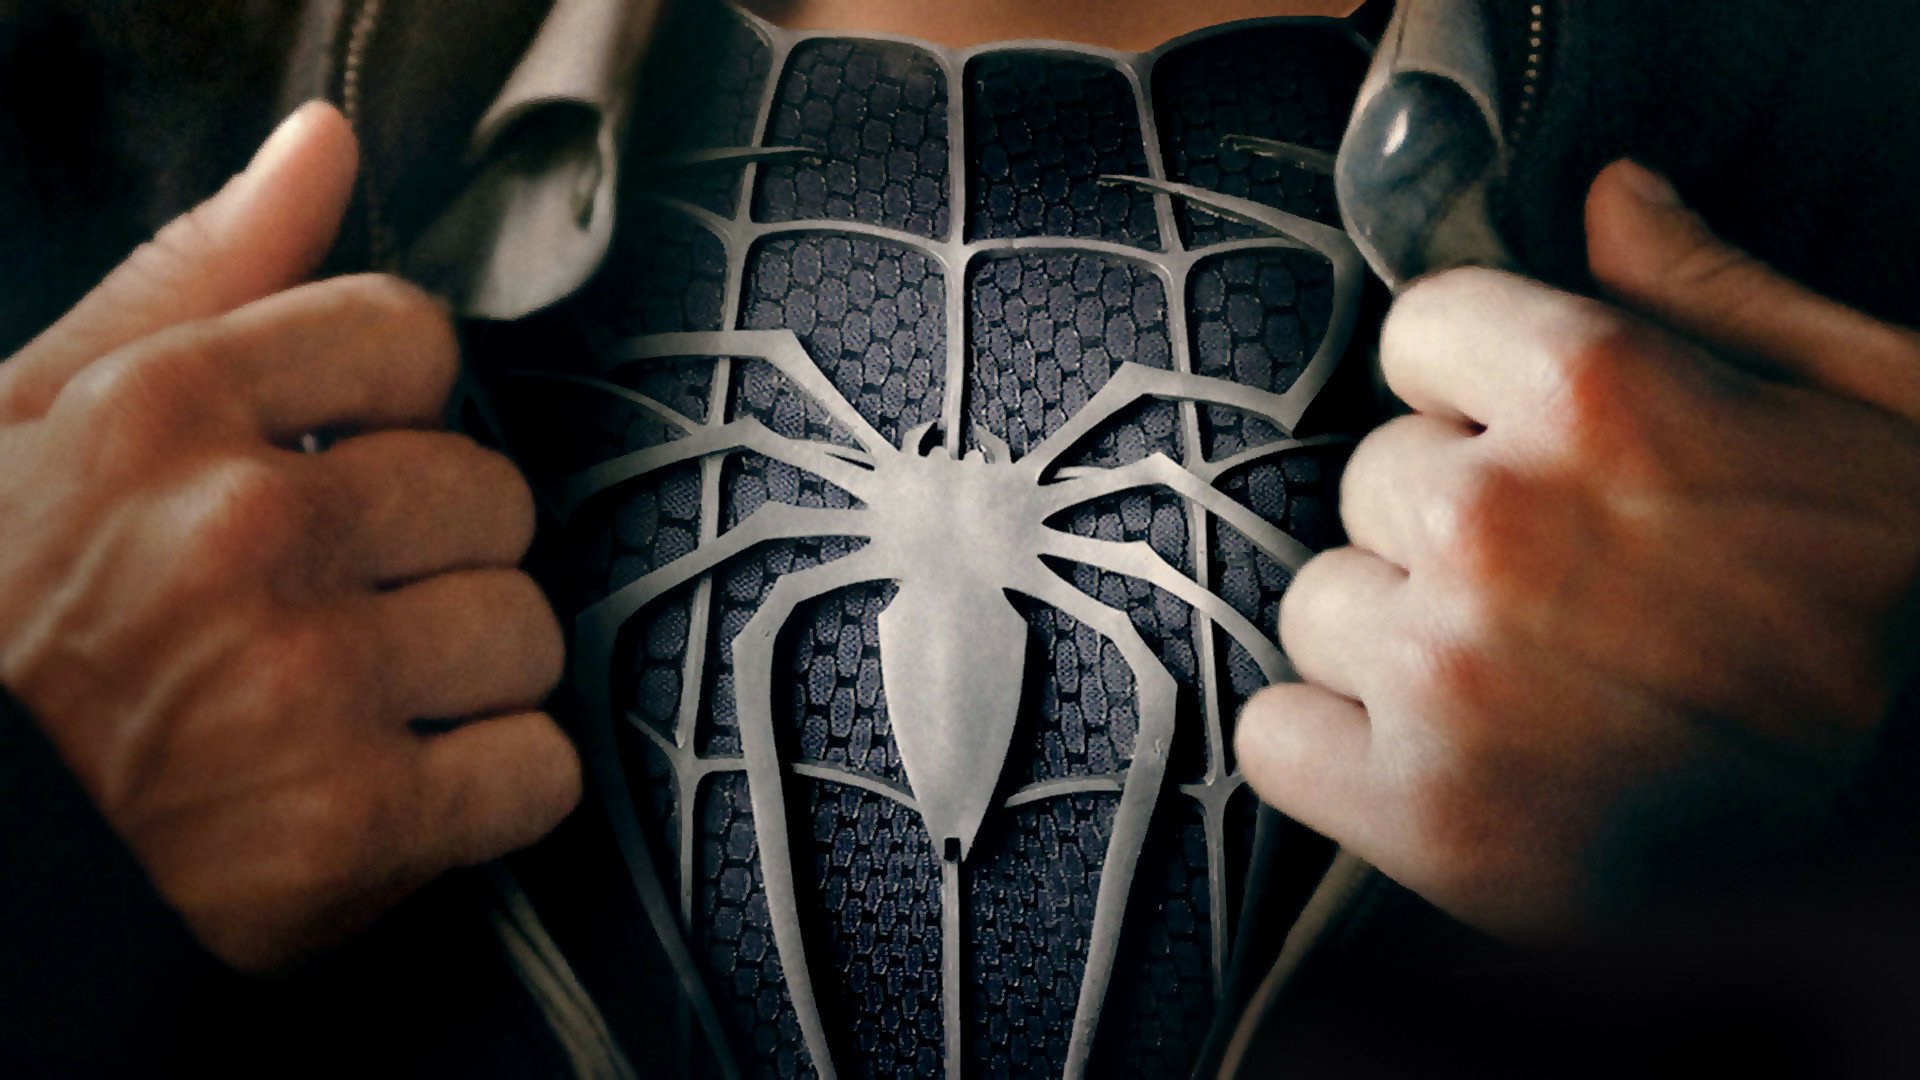 Spider-Man 3 download the last version for iphone